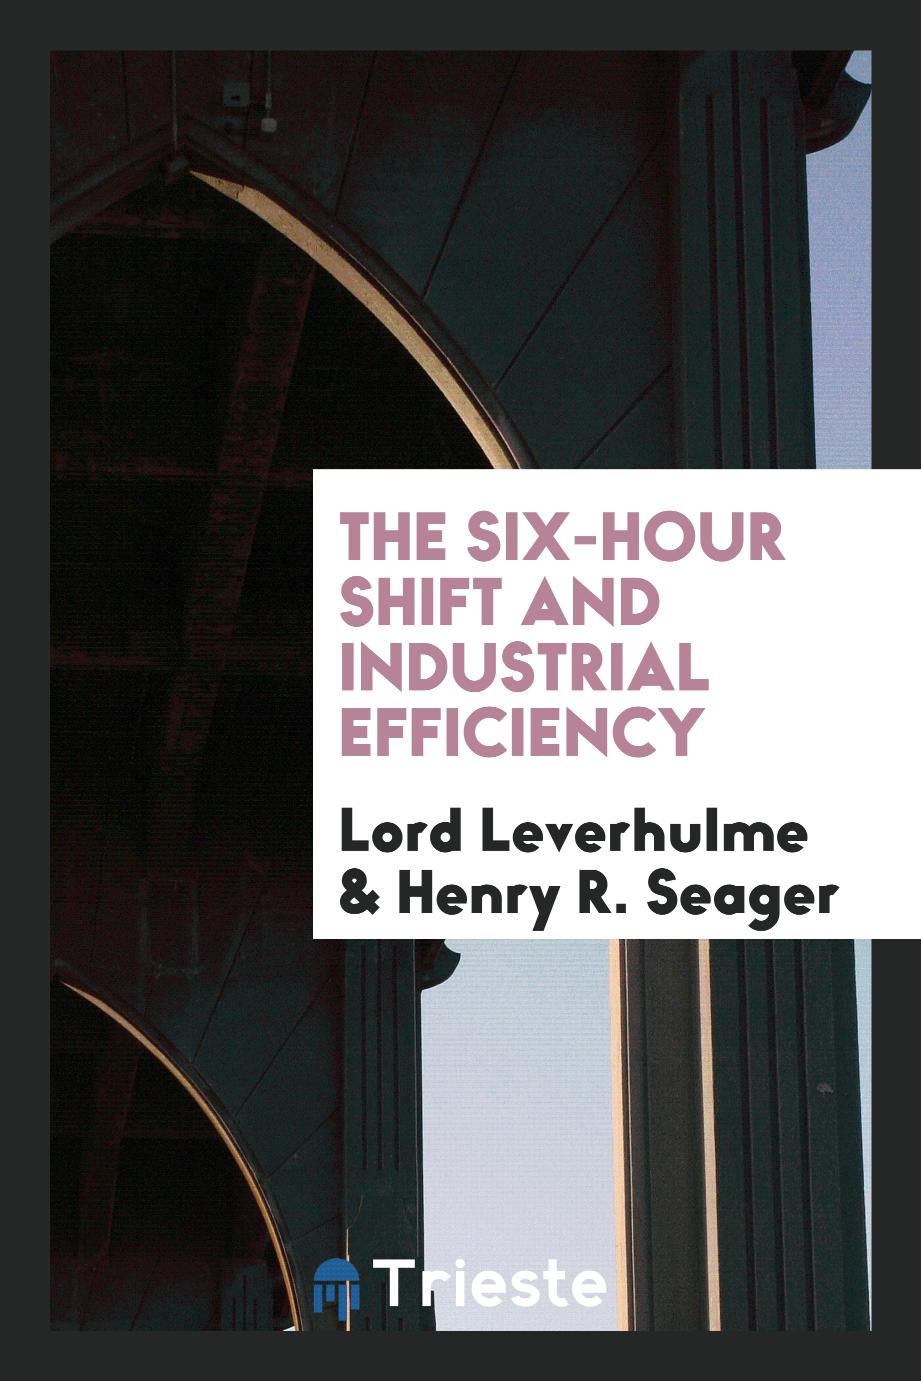 The six-hour shift and industrial efficiency